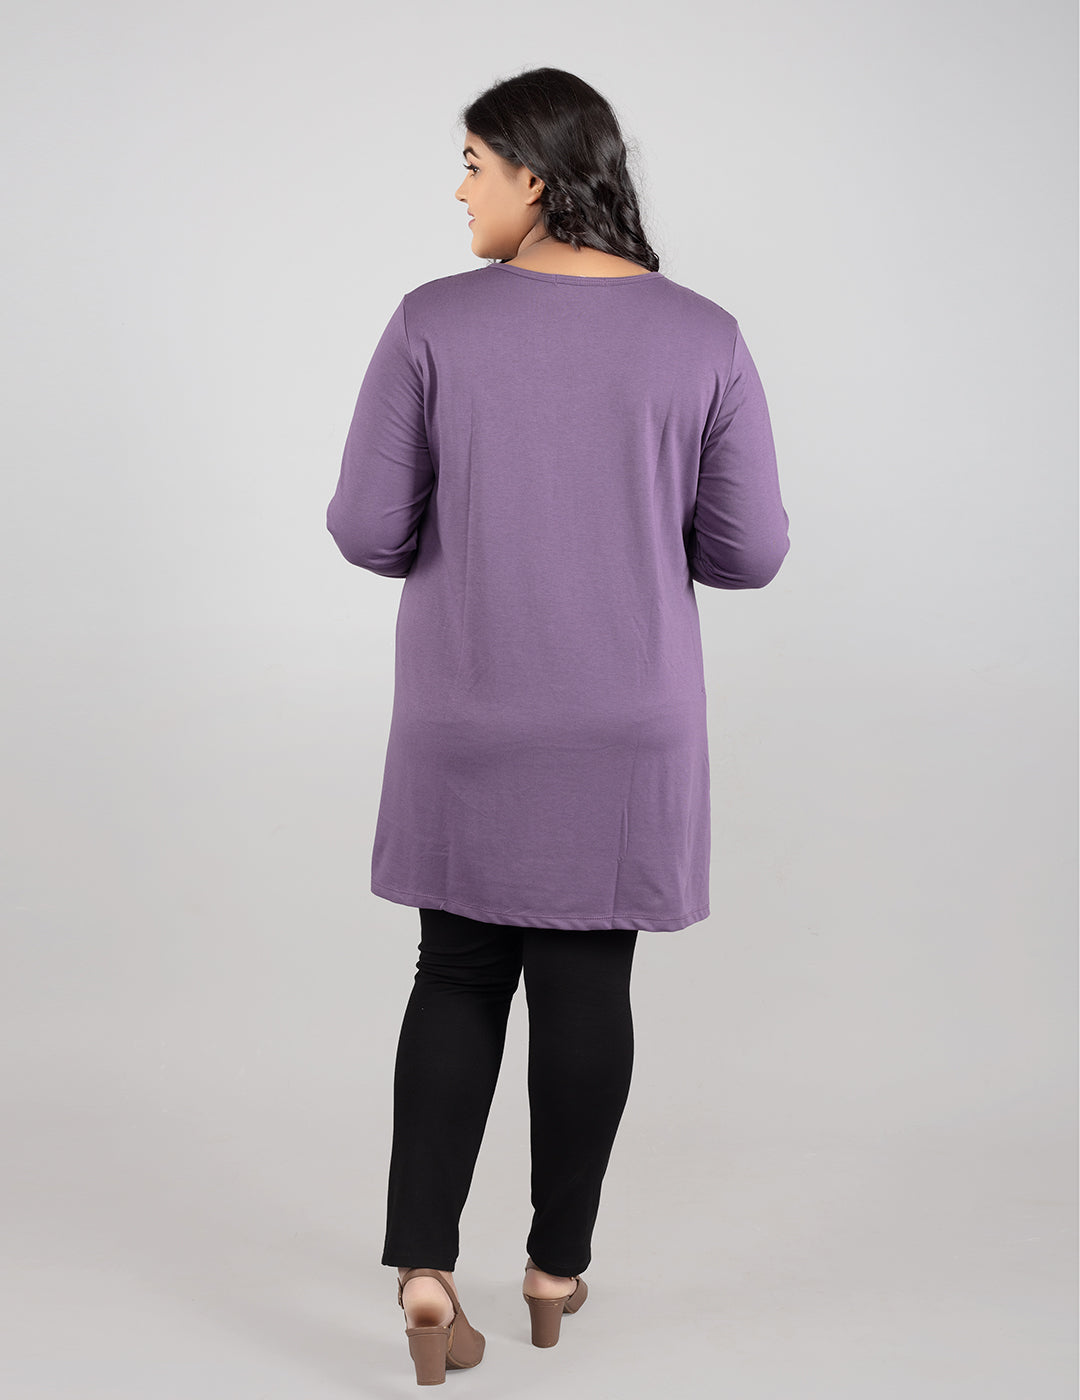 Plus Size Printed Long Tops For Women Full Sleeves - Pack of 2 (Lavender & Blue)